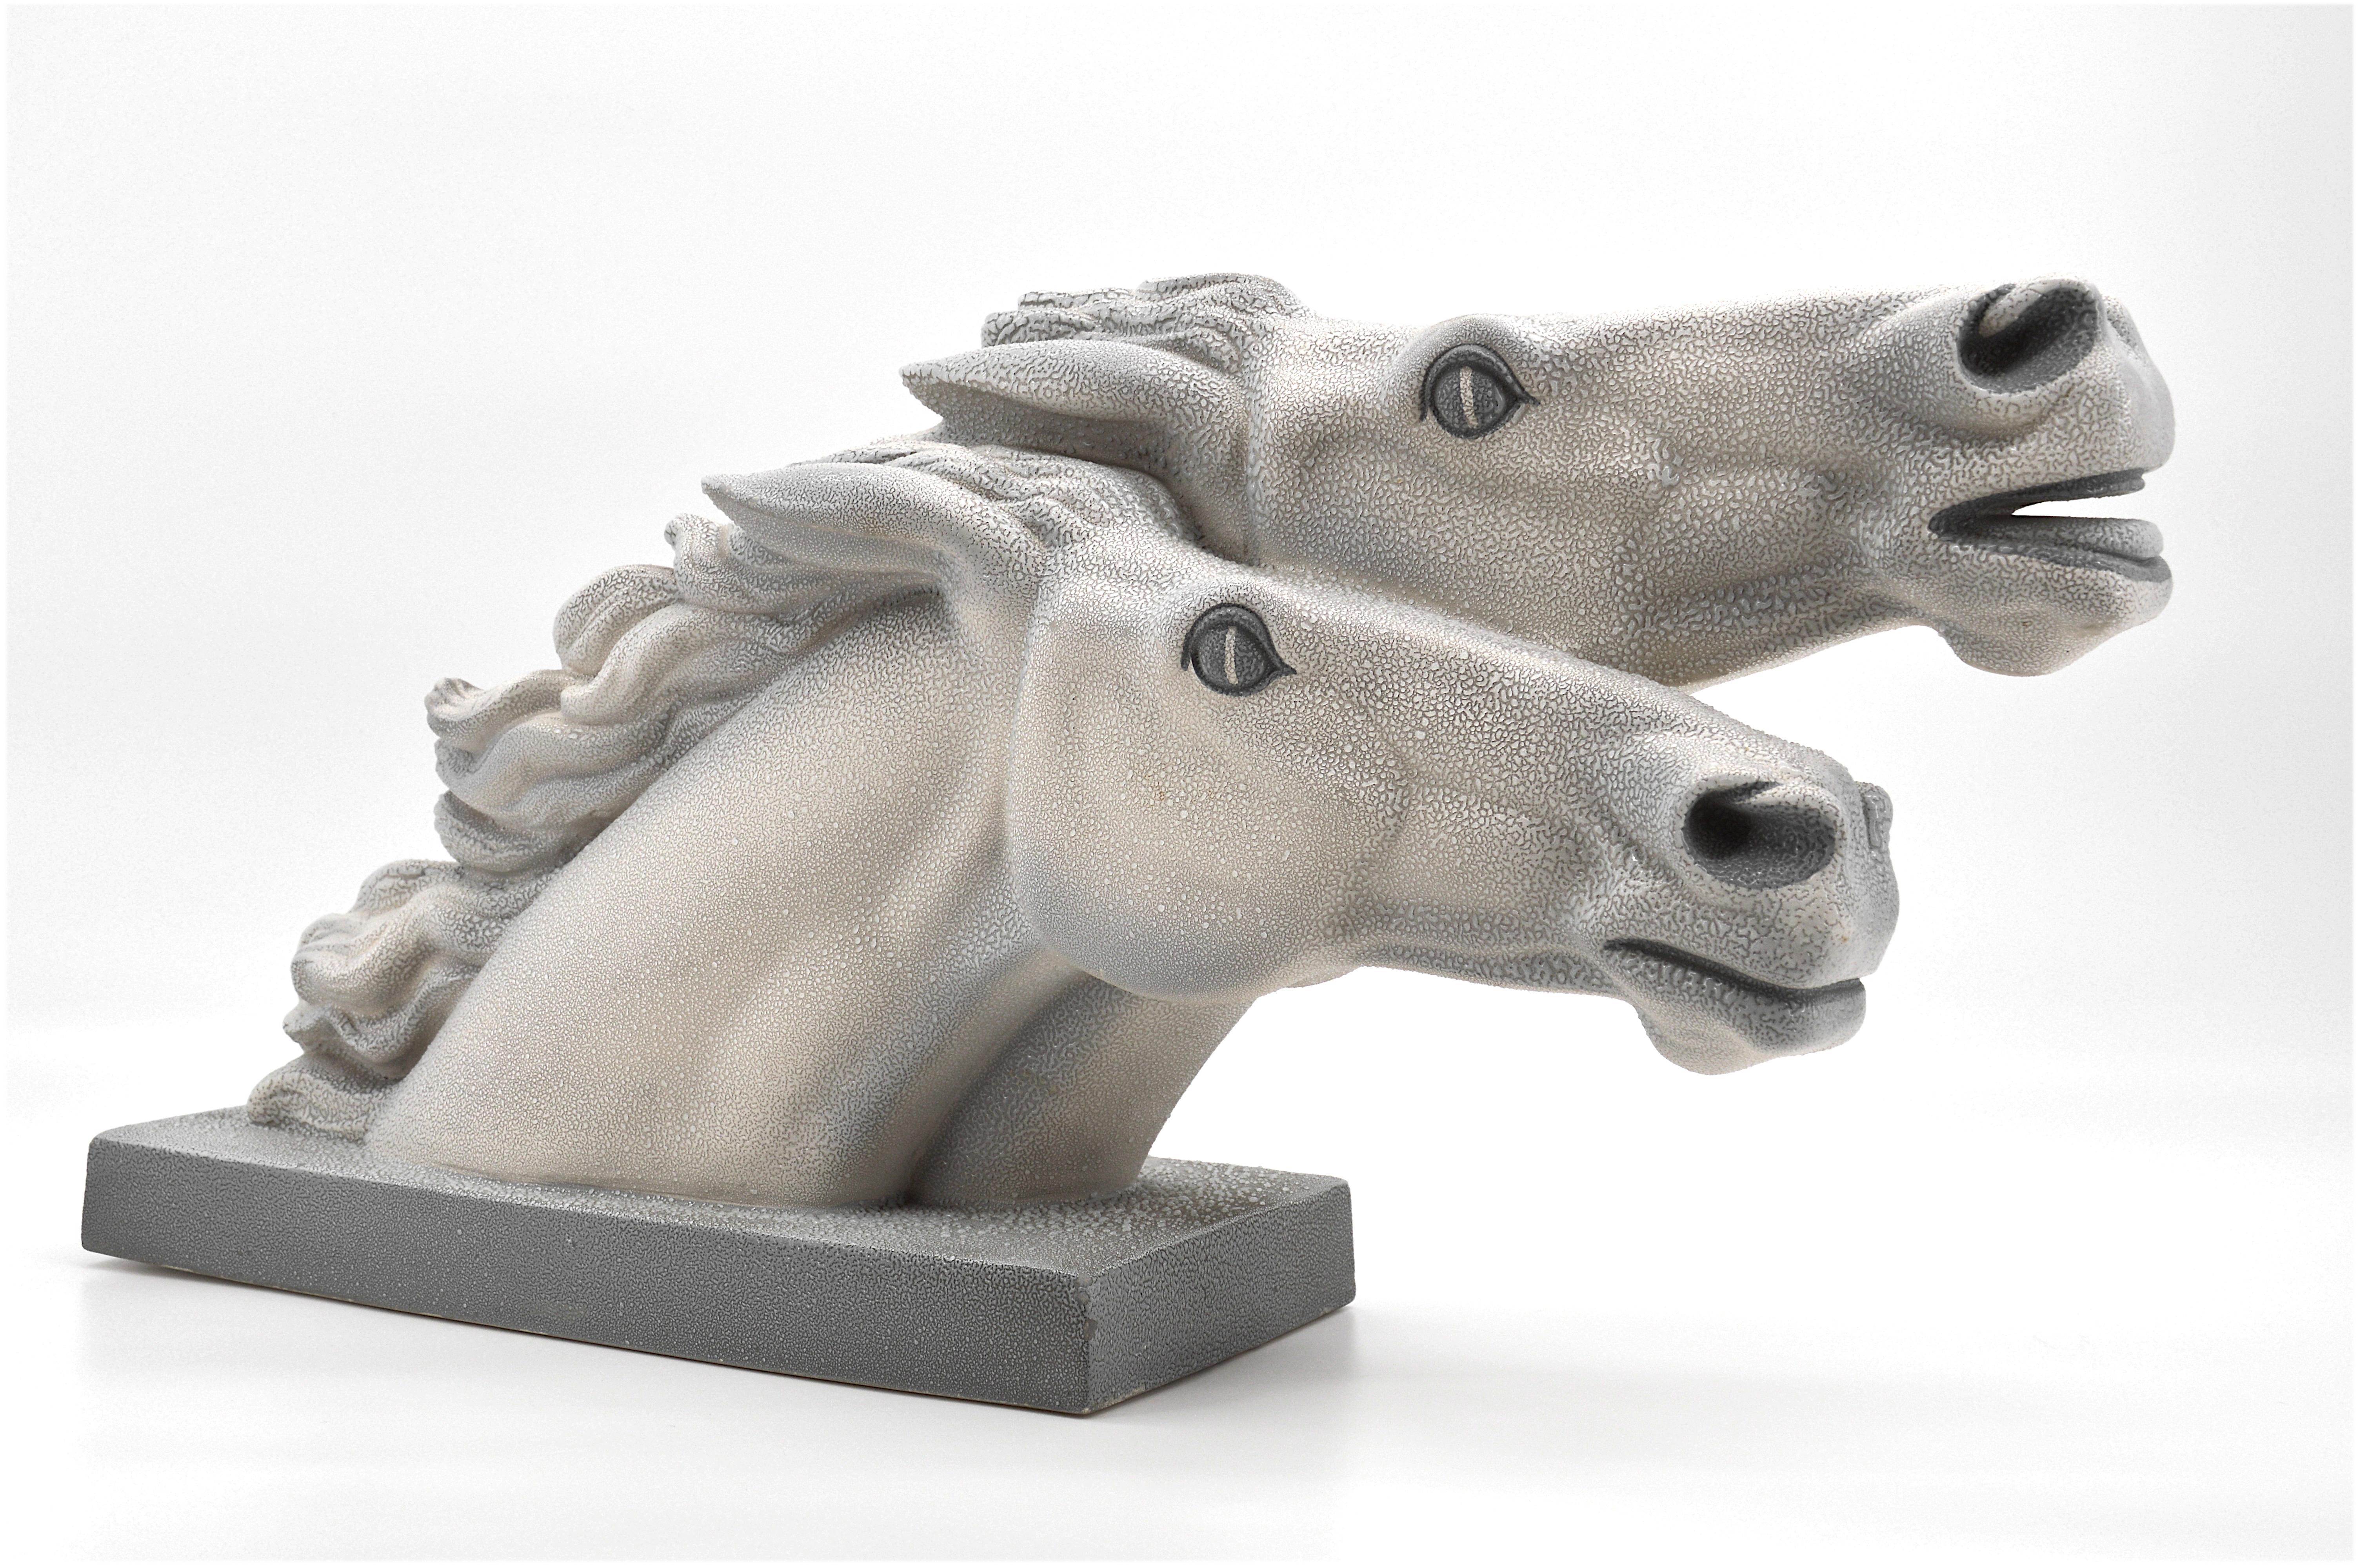 French Art Deco horse statue by Charles Lemanceau at Sainte-Radegonde, France, 1930s. This piece was illustrated in the Sainte-Radegonde catalog, page #6. Ceramic sculpture named 